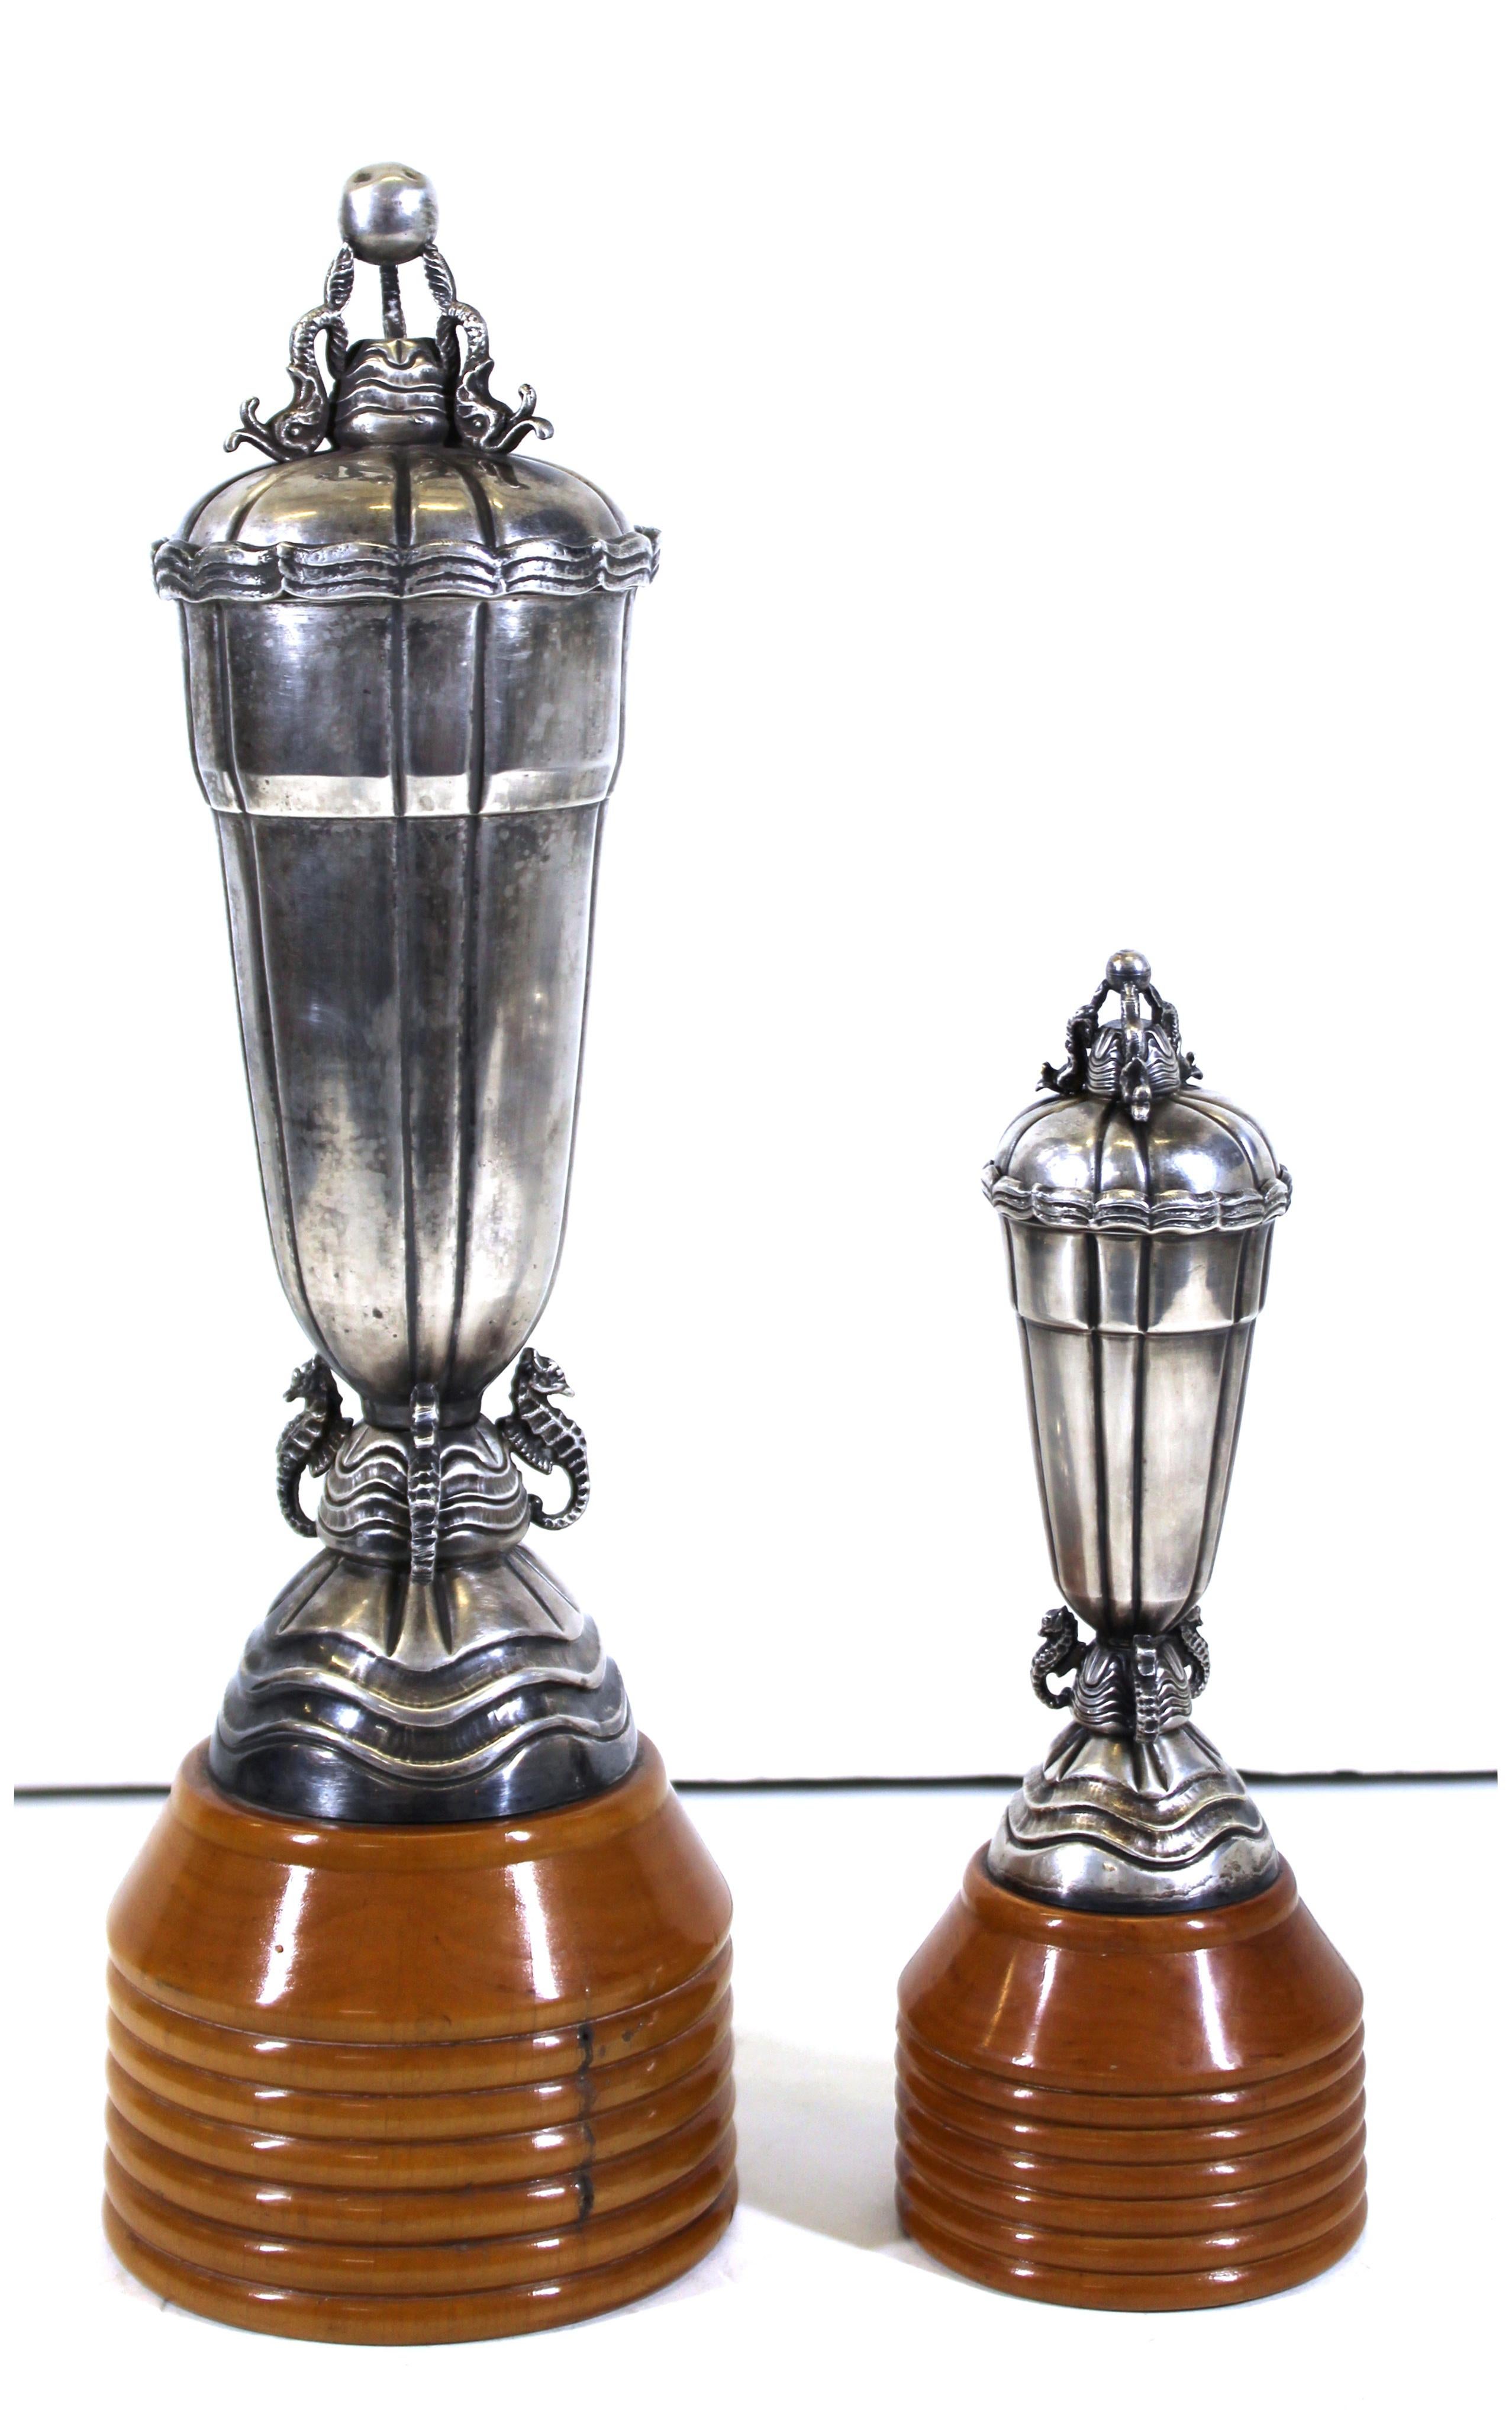 Continental Art Deco period pair of sterling silver covered urns adorned with dolphins on the covers and seahorses at the bases, mounted on turned wood bases. The pair was made in the 1920s in Europe, likely in Italy. In remarkable antique condition